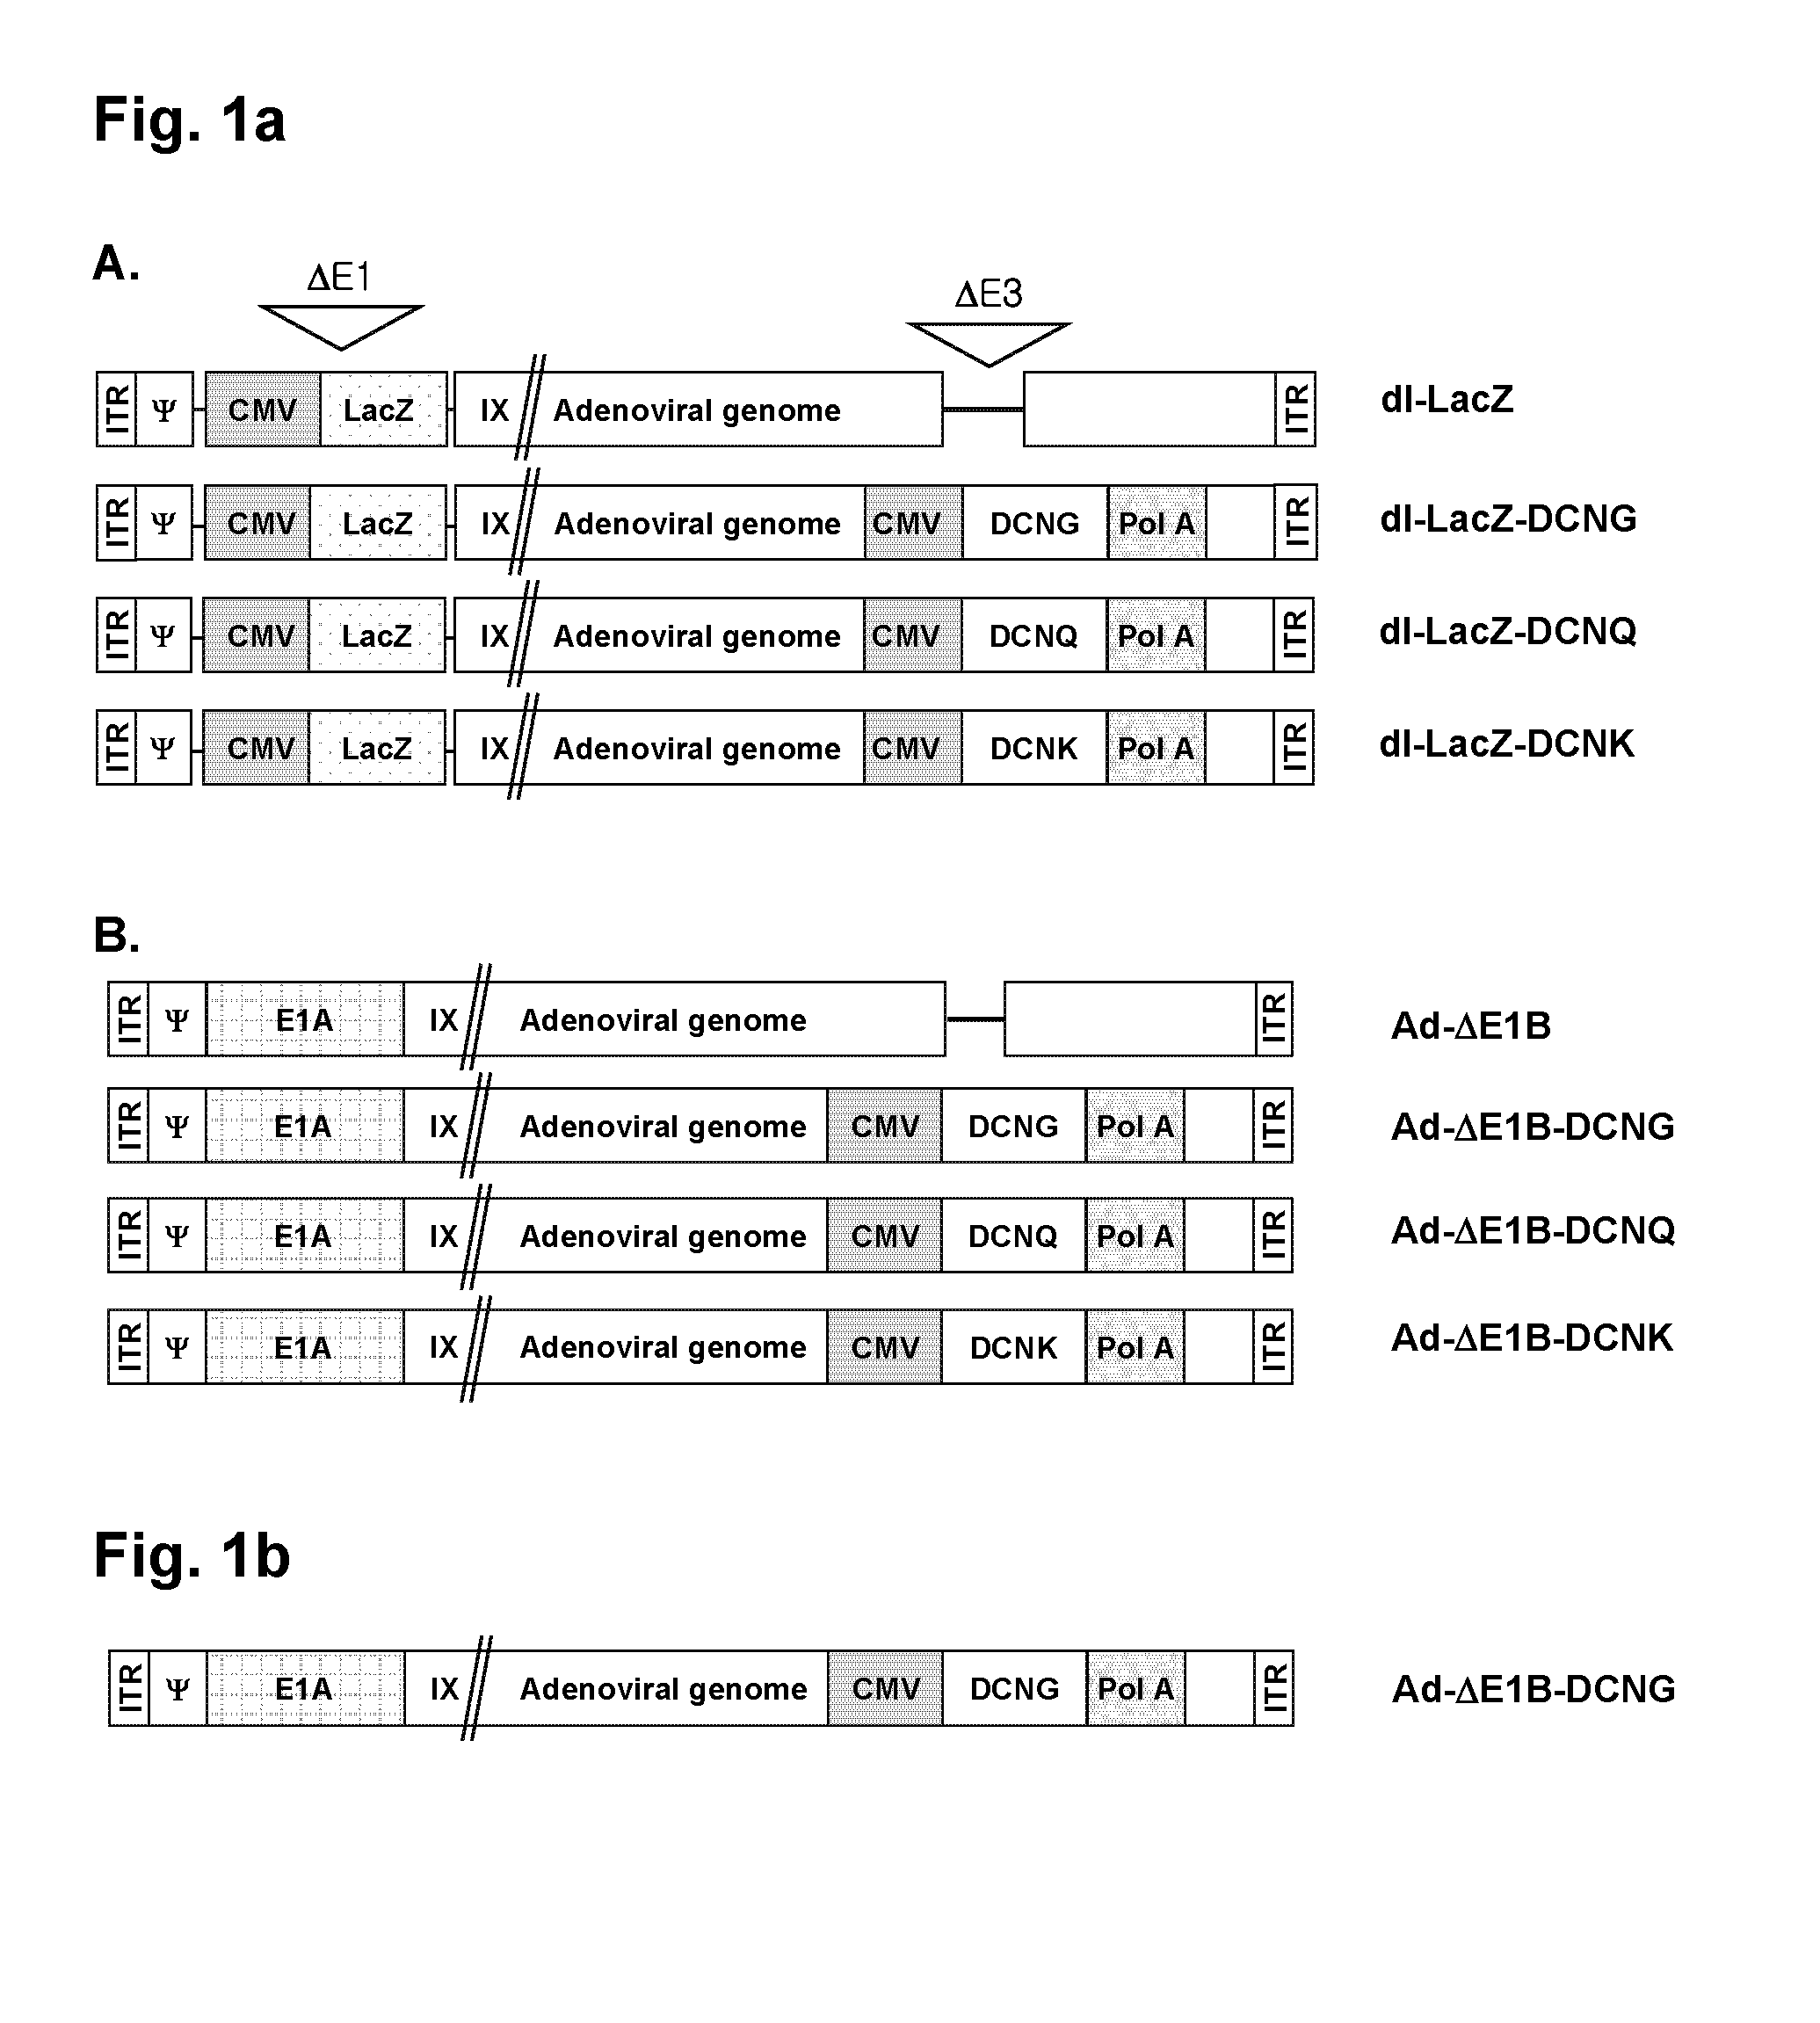 Decorin Gene Delivery System And Cancer Treatment